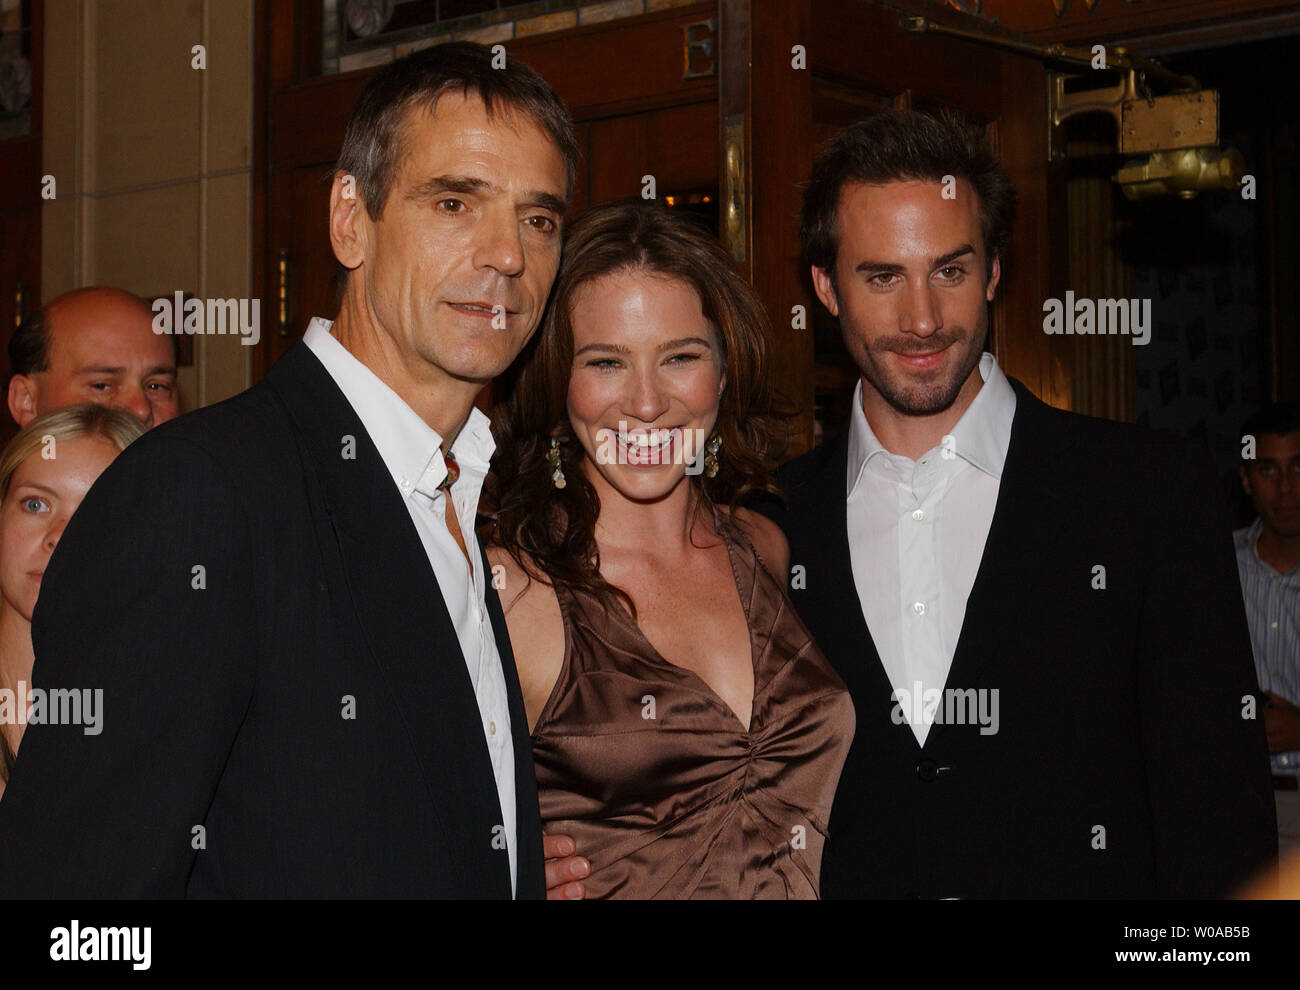 Jeremy Irons (left), Lynn Collins and Joseph Fiennes pose for photographers on the red carpet before the Toronto International Film Festival screening of 'The Merchant of Venice' at the Elgin Theater September 11, 2004  in Toronto, Canada. (UPI Photo/Christine Chew) Stock Photo